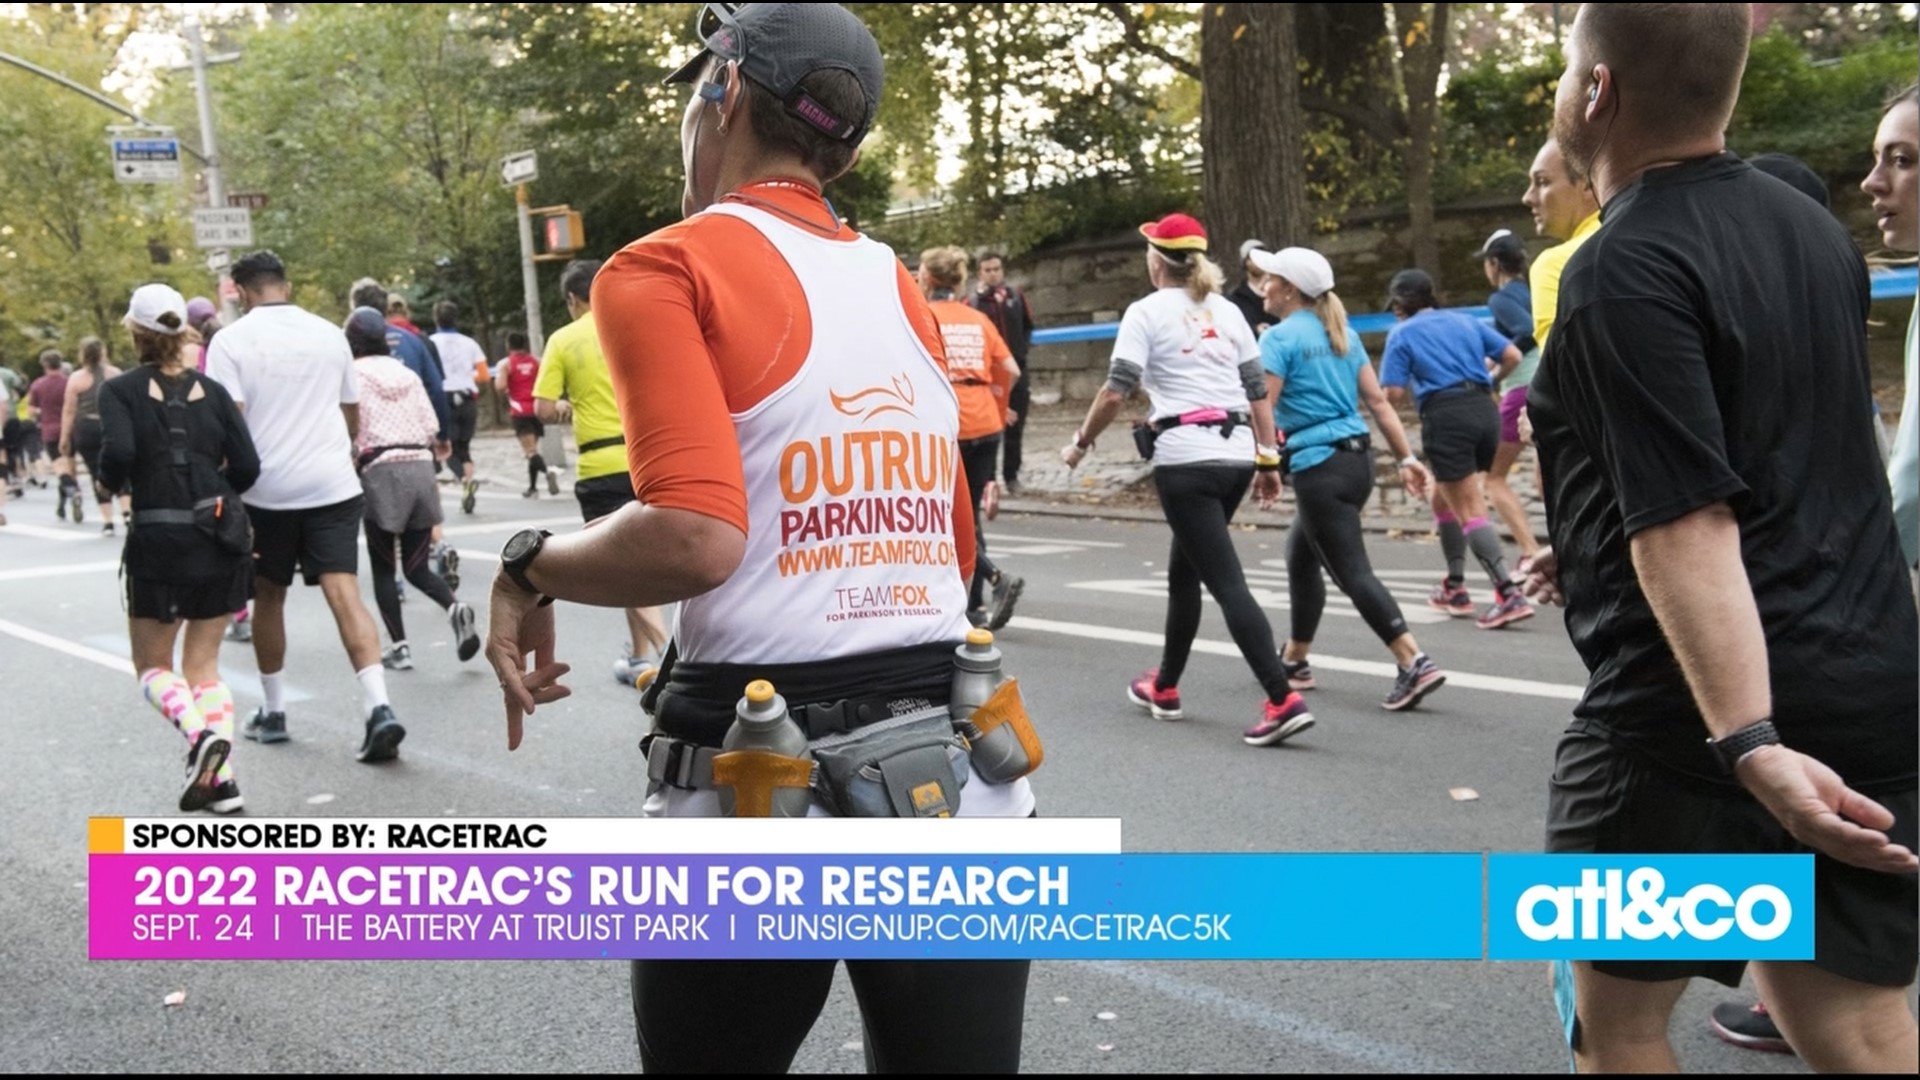 RaceTrac is partnering with the Michael J. Fox Foundation to raise money for Parkinson's Research with their Run for Research 5K.